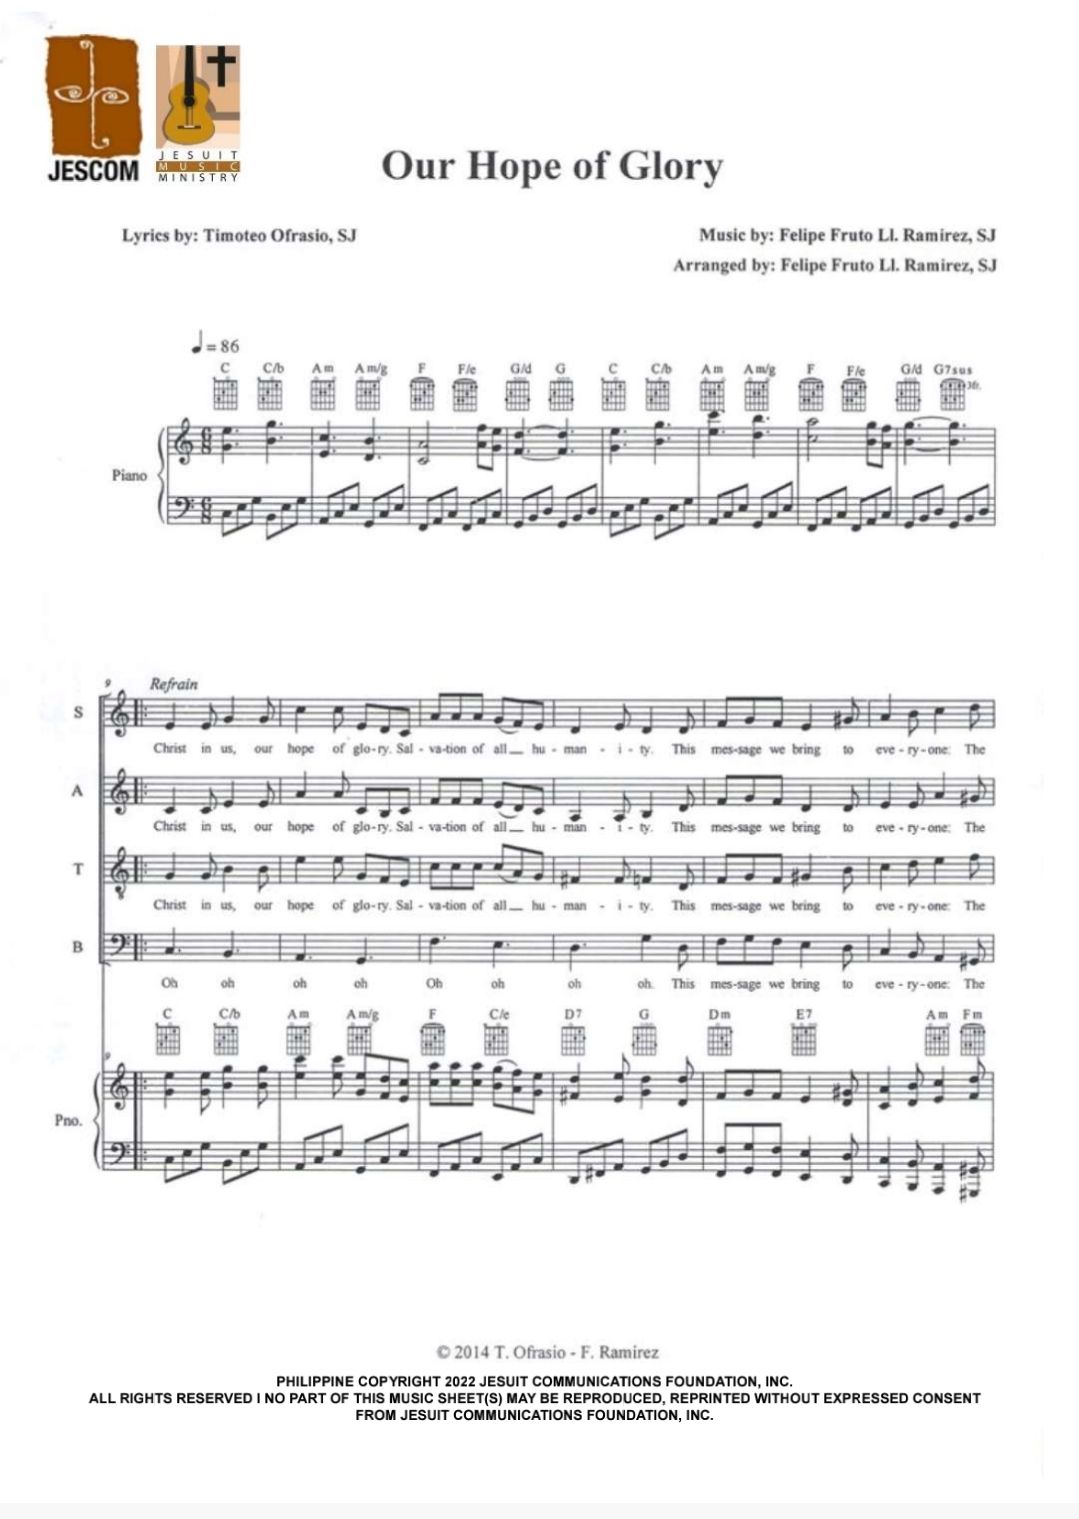 Our Hope of Glory – Music Sheet